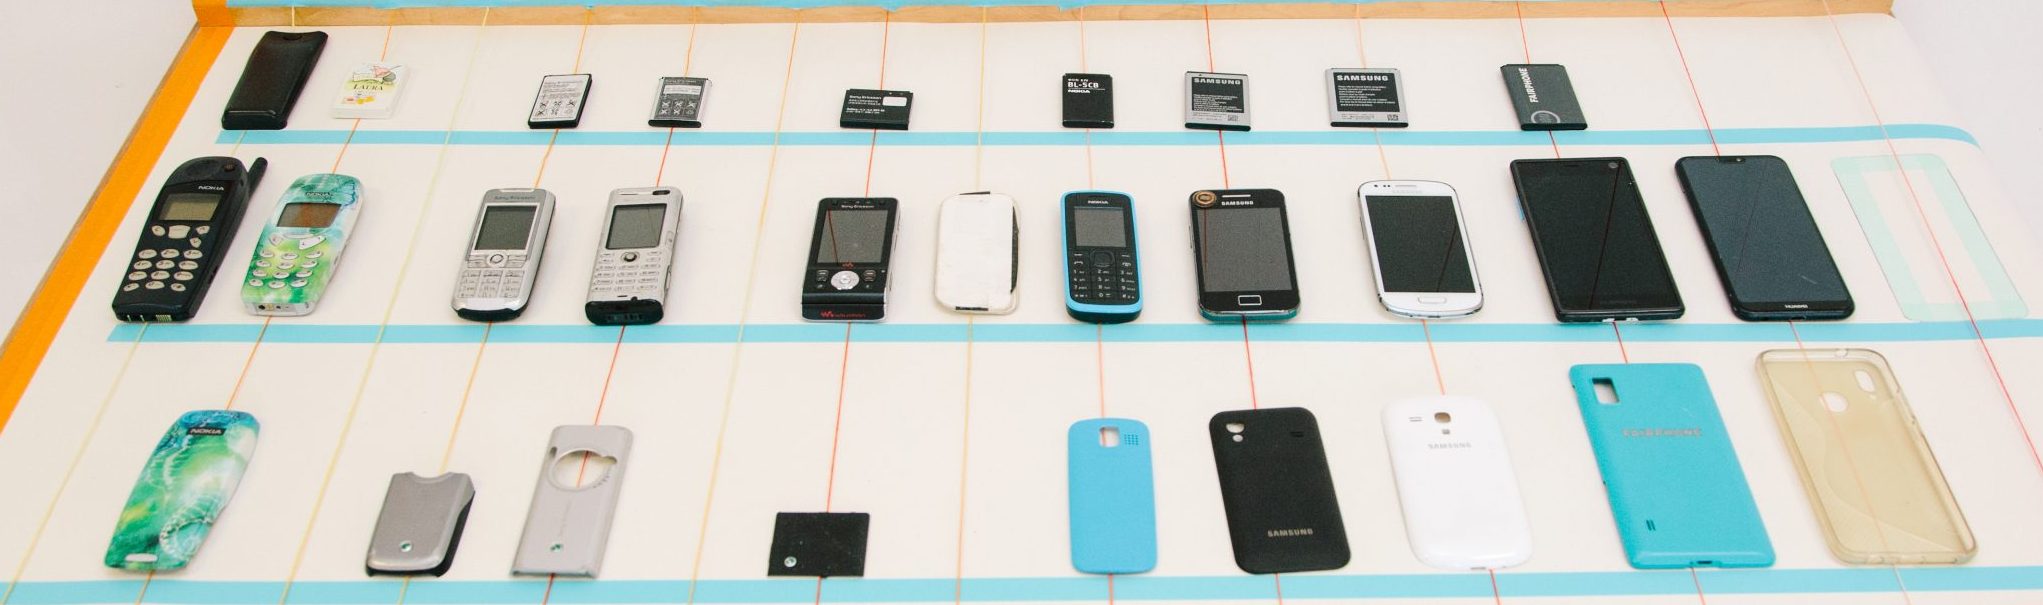 A desk showing an array of old and new mobile phones and phone cases ordered neatly